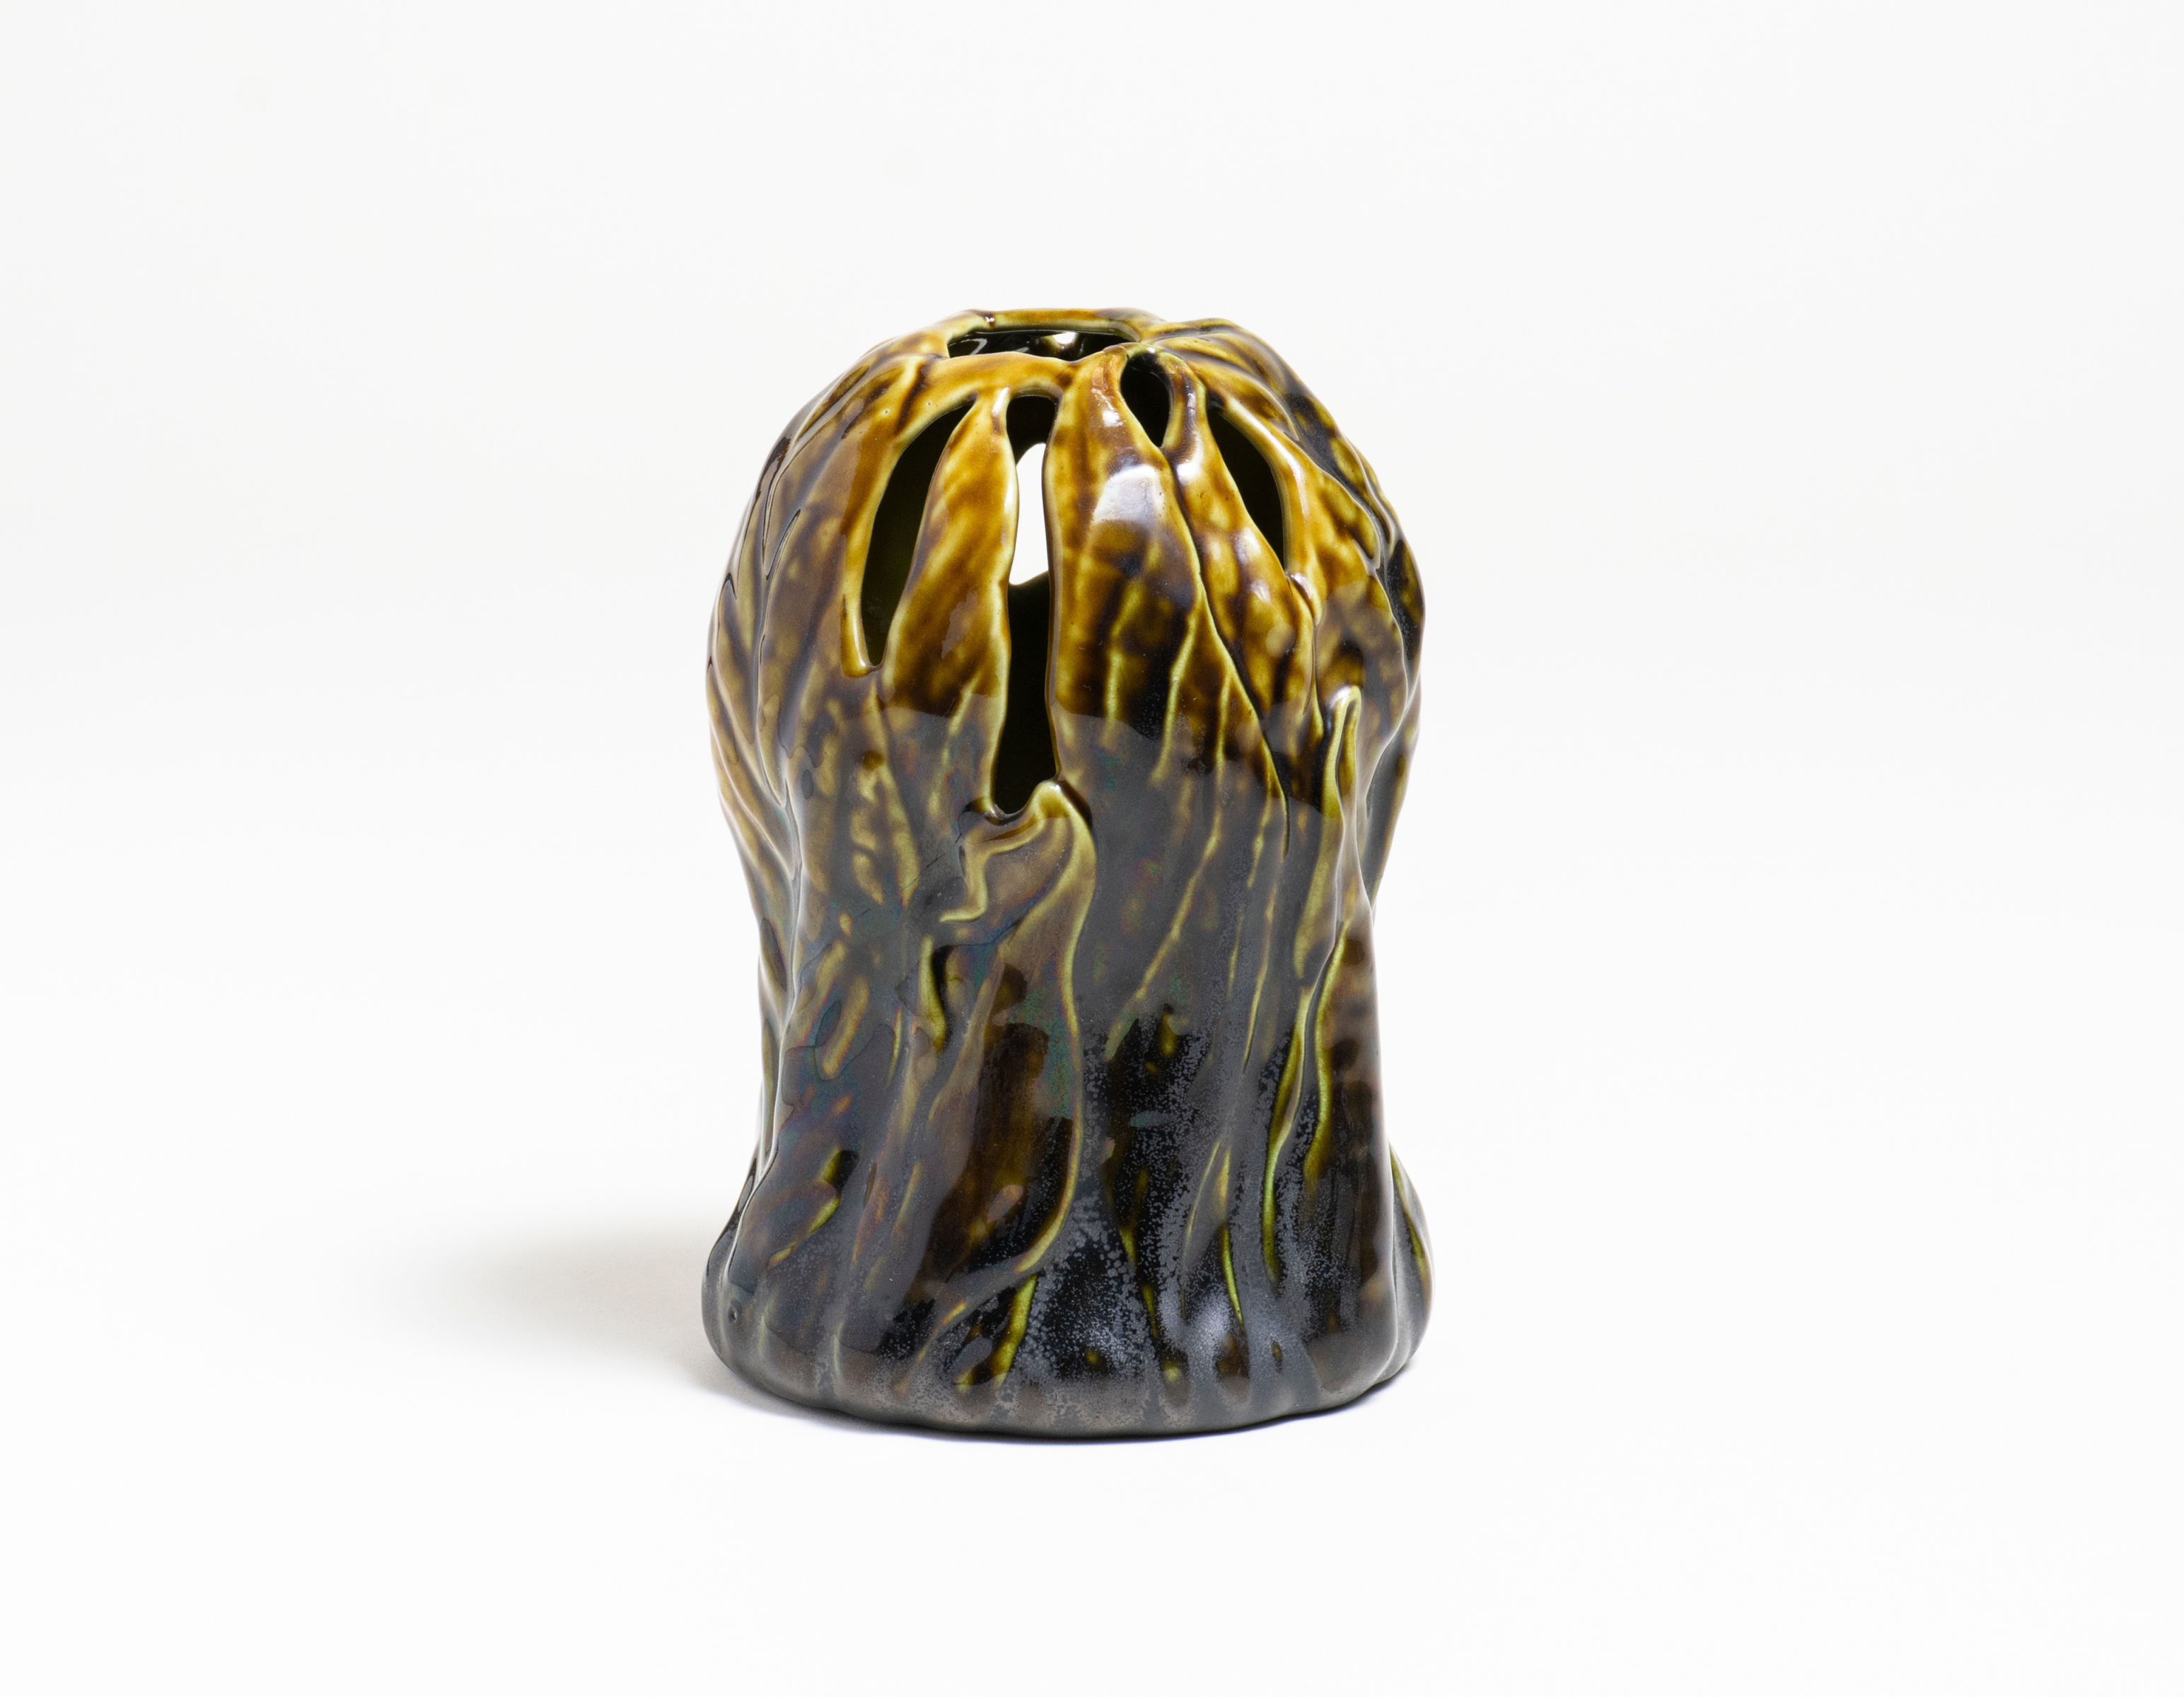 a rare tiffany pottery vase, the vessel taking the form of the skunk cabbage plants, the body of the vase formed by overlapping leaves sprouting from the &quot;earth&quot; at the base, with openings at the top